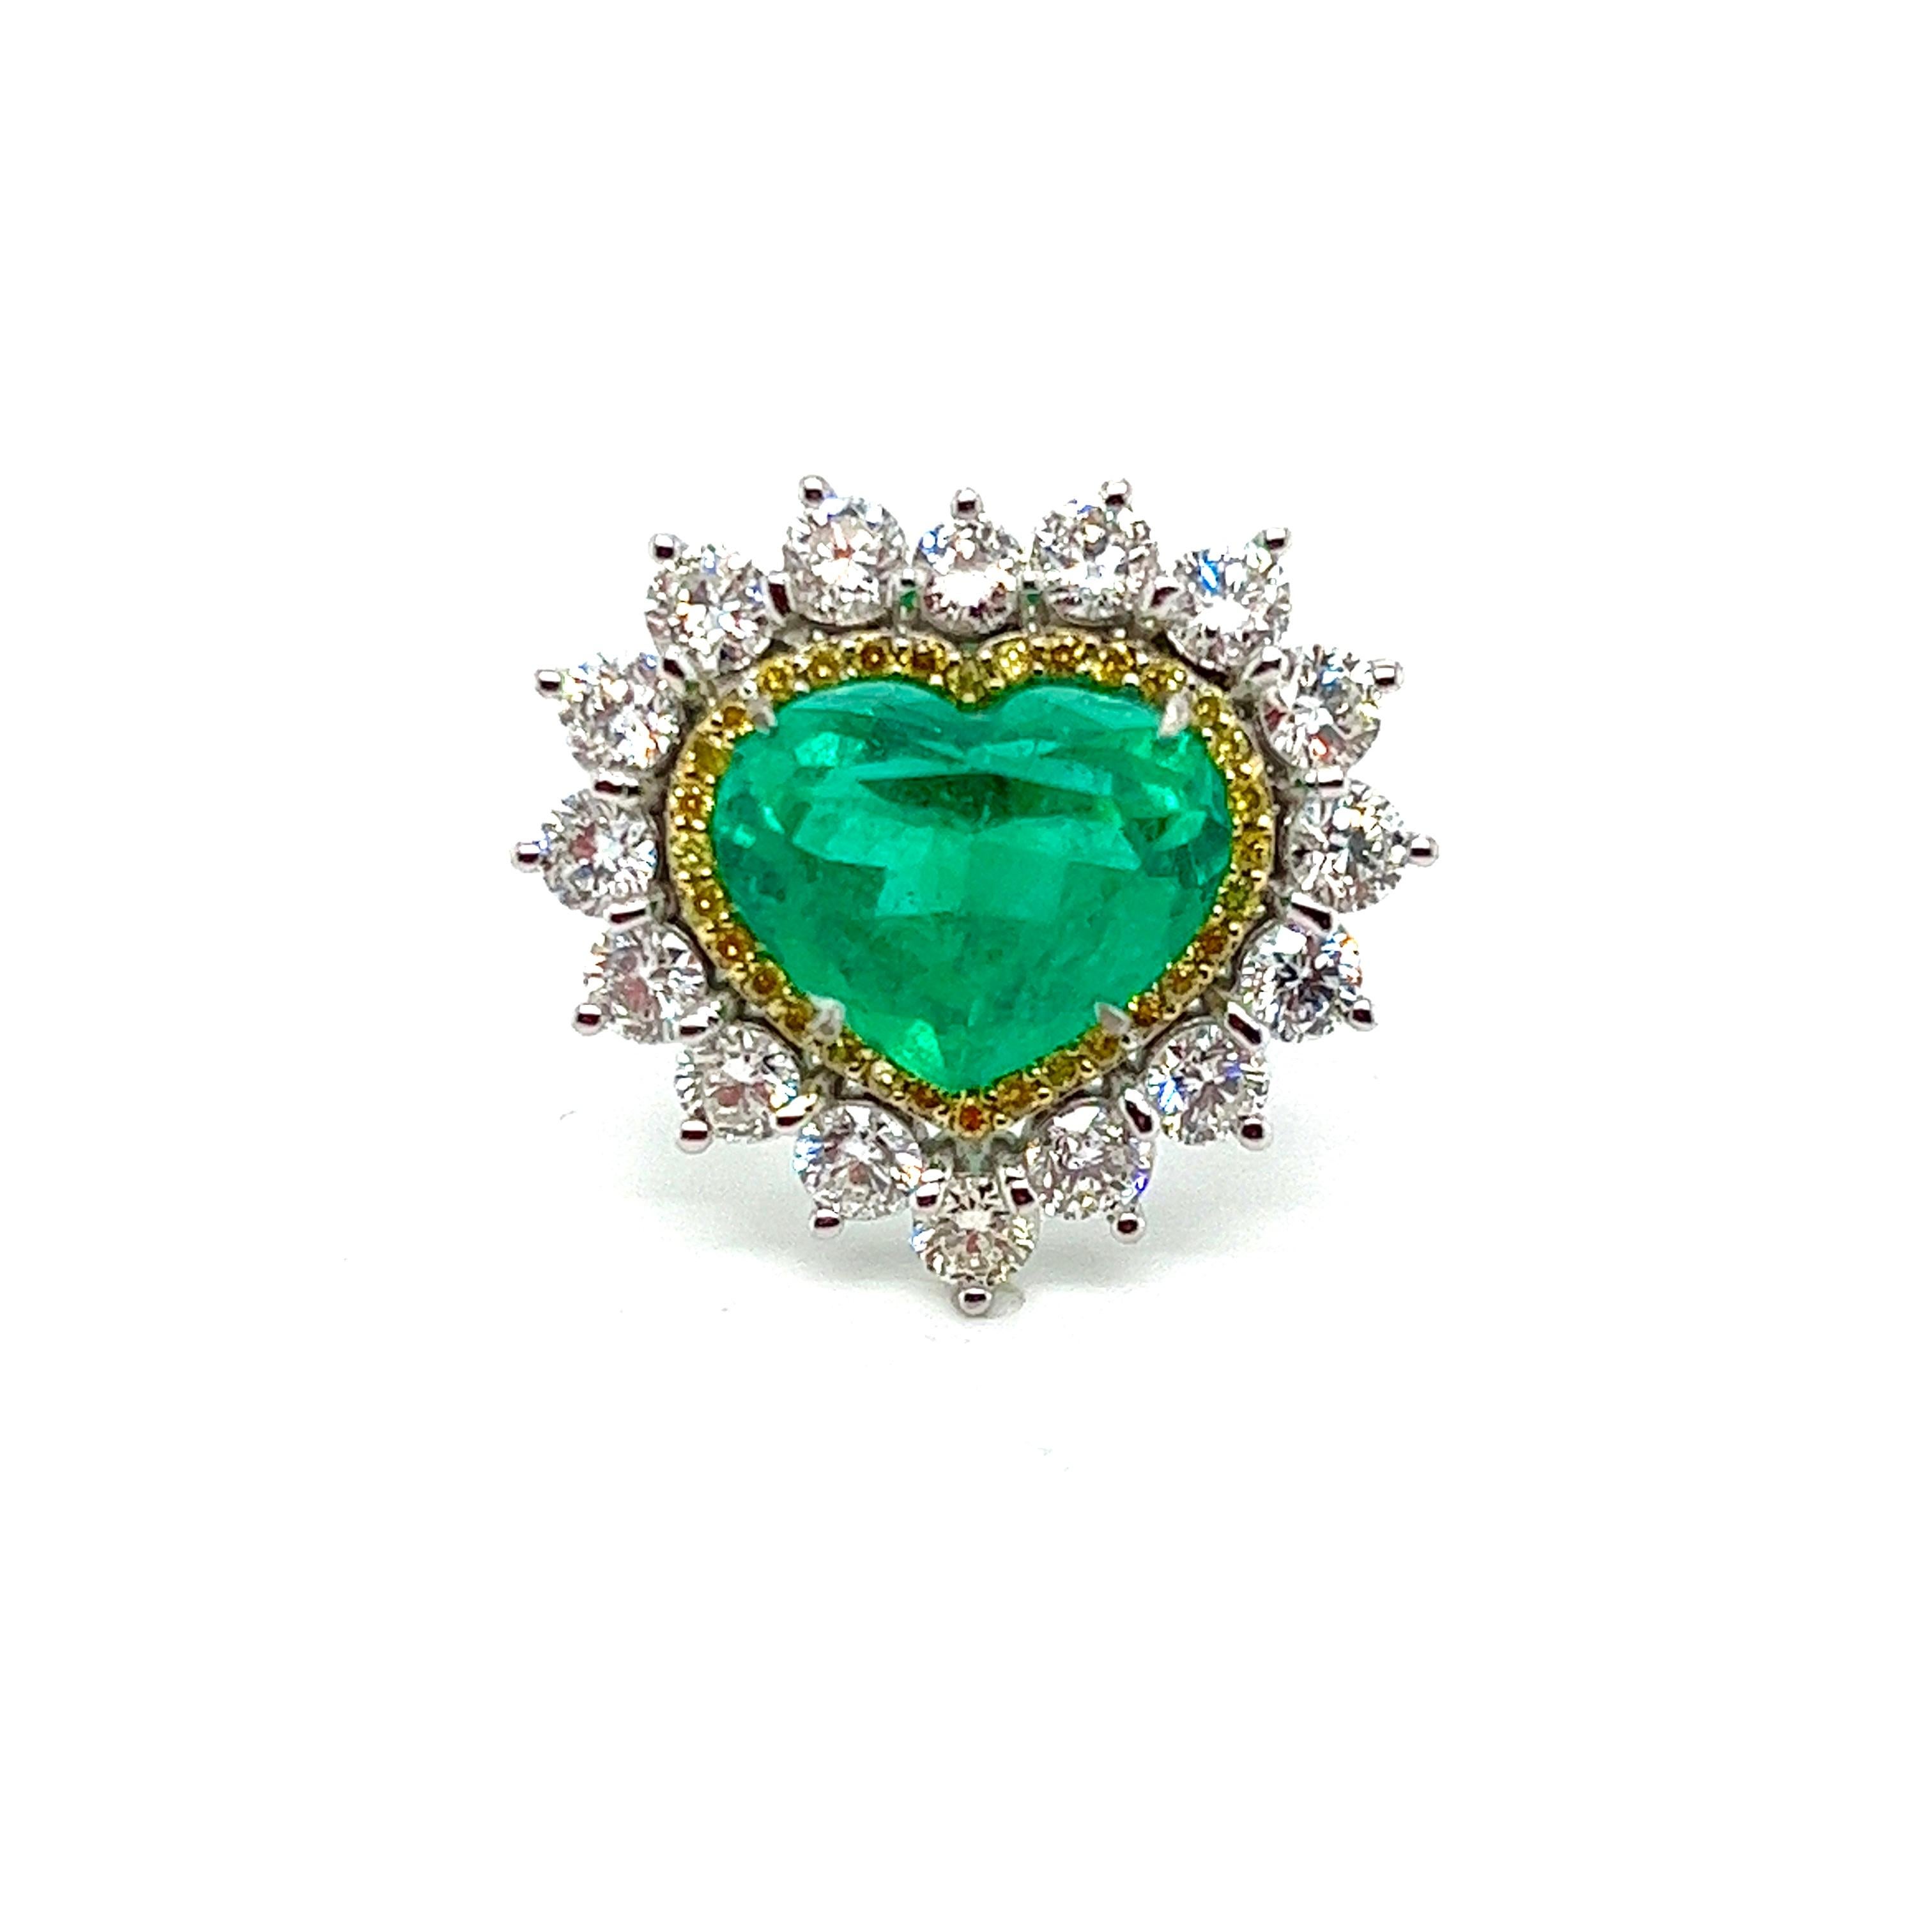 Captivating 5.15-Carat Colombian Emerald Ring with Yellow and White Diamond Halo

Embrace the enchanting allure of nature with our stunning Colombian Emerald Ring, featuring a magnificent 5.15-carat heart-shaped green crystal emerald sourced